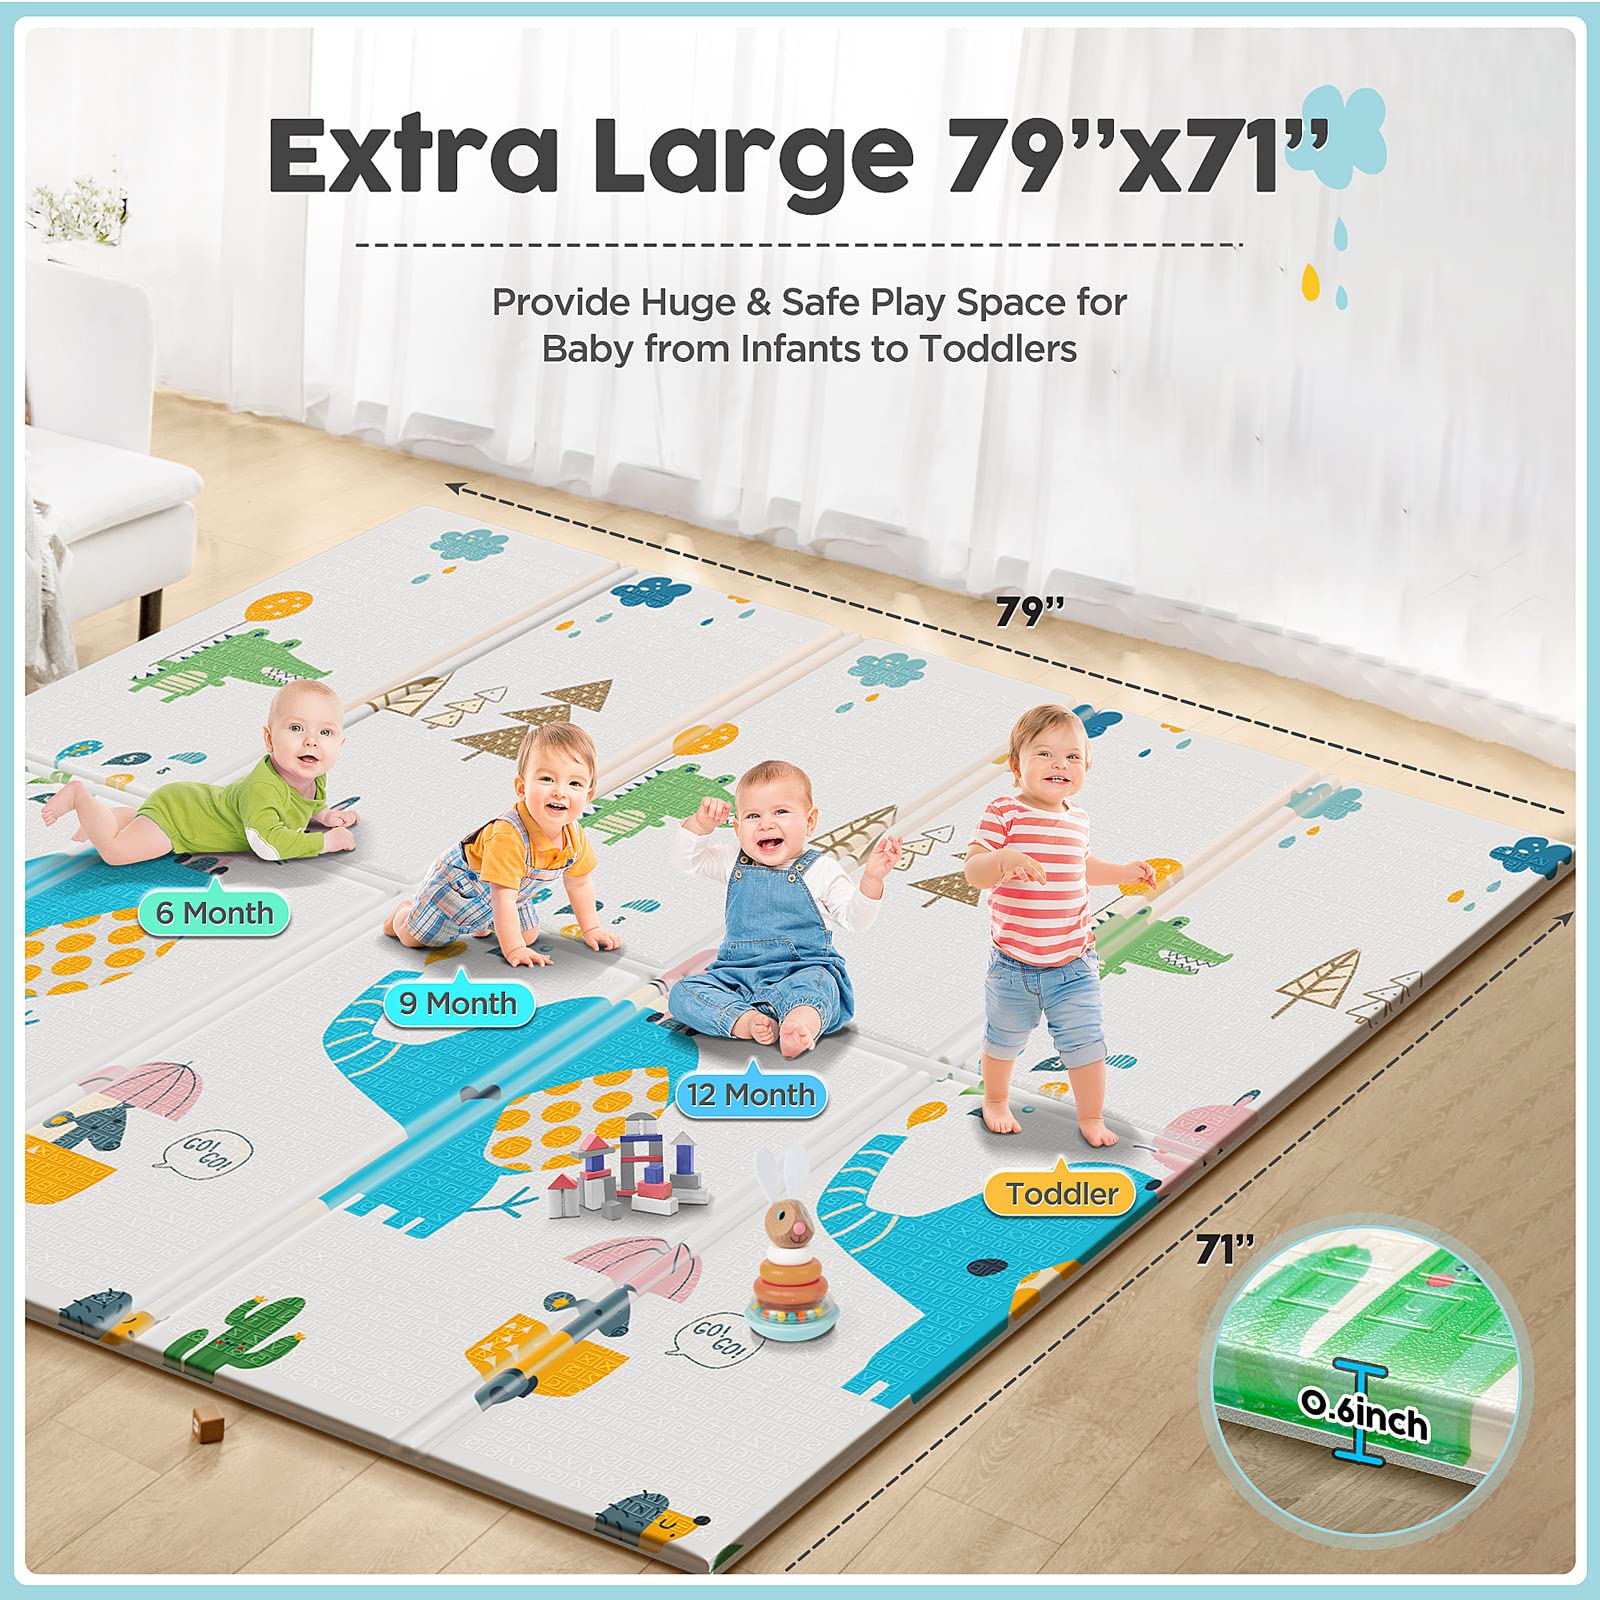 Gimars XL BPA Free 0.6 in Thickest Foldable Baby Play Mat, Waterproof Padded Foam Floor Baby Crawling Mat, Portable Play mat for Babies and Toddlers, Infants,Boys,Girls Indoor Outdoor Use (79